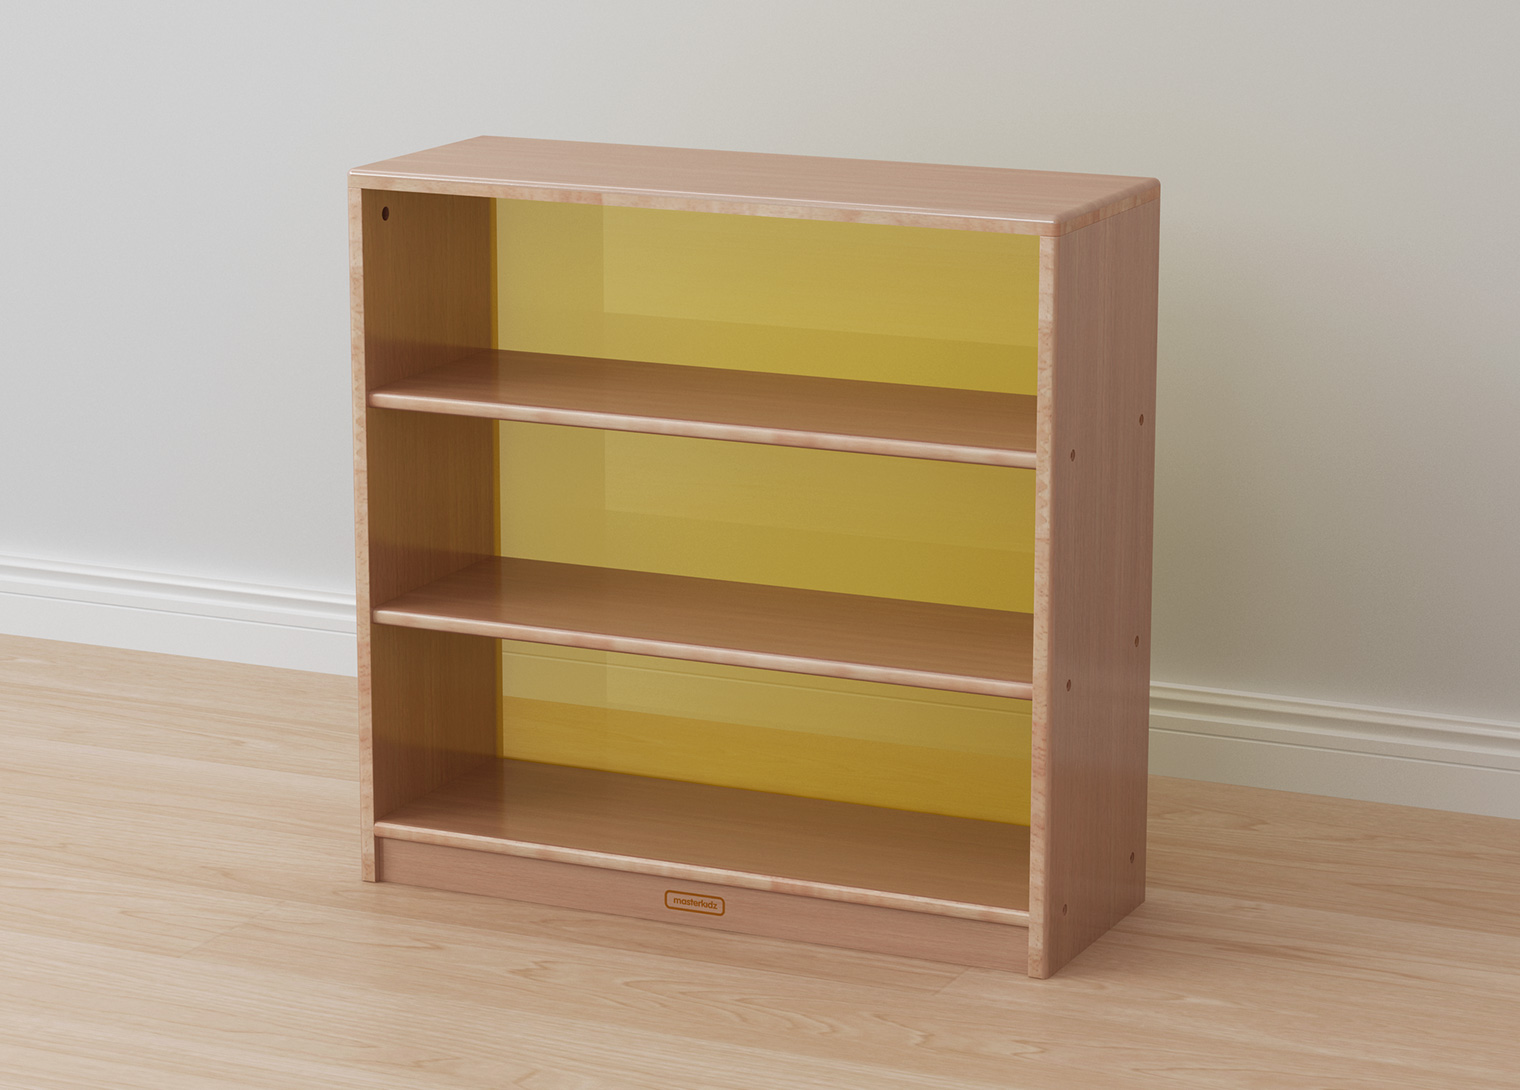 Forest School - 789H x 810L Wooden  Shelving Unit - Translucent Yellow Back